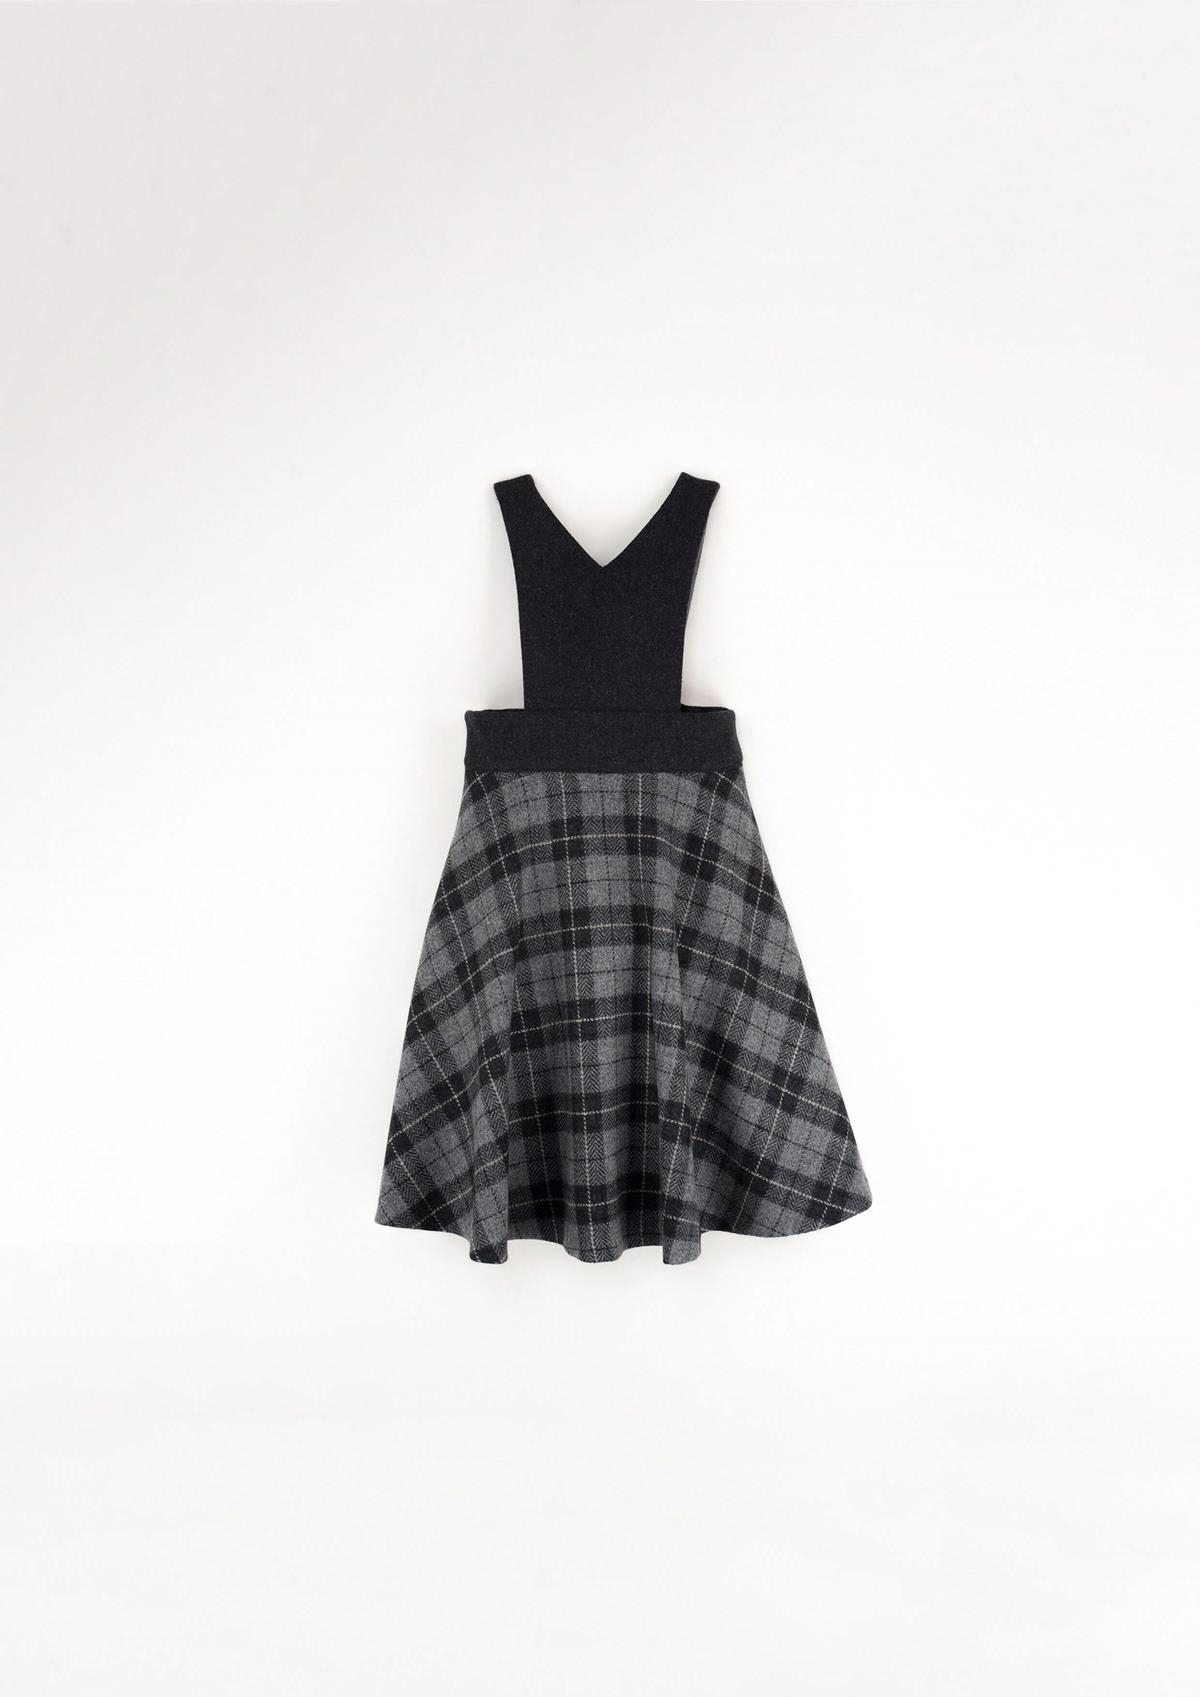 Mod.36.2 Grey check woollen dungaree dress with embroidery | AW23.24 Mod.36.2 Grey check woollen dungaree dress with embroidery